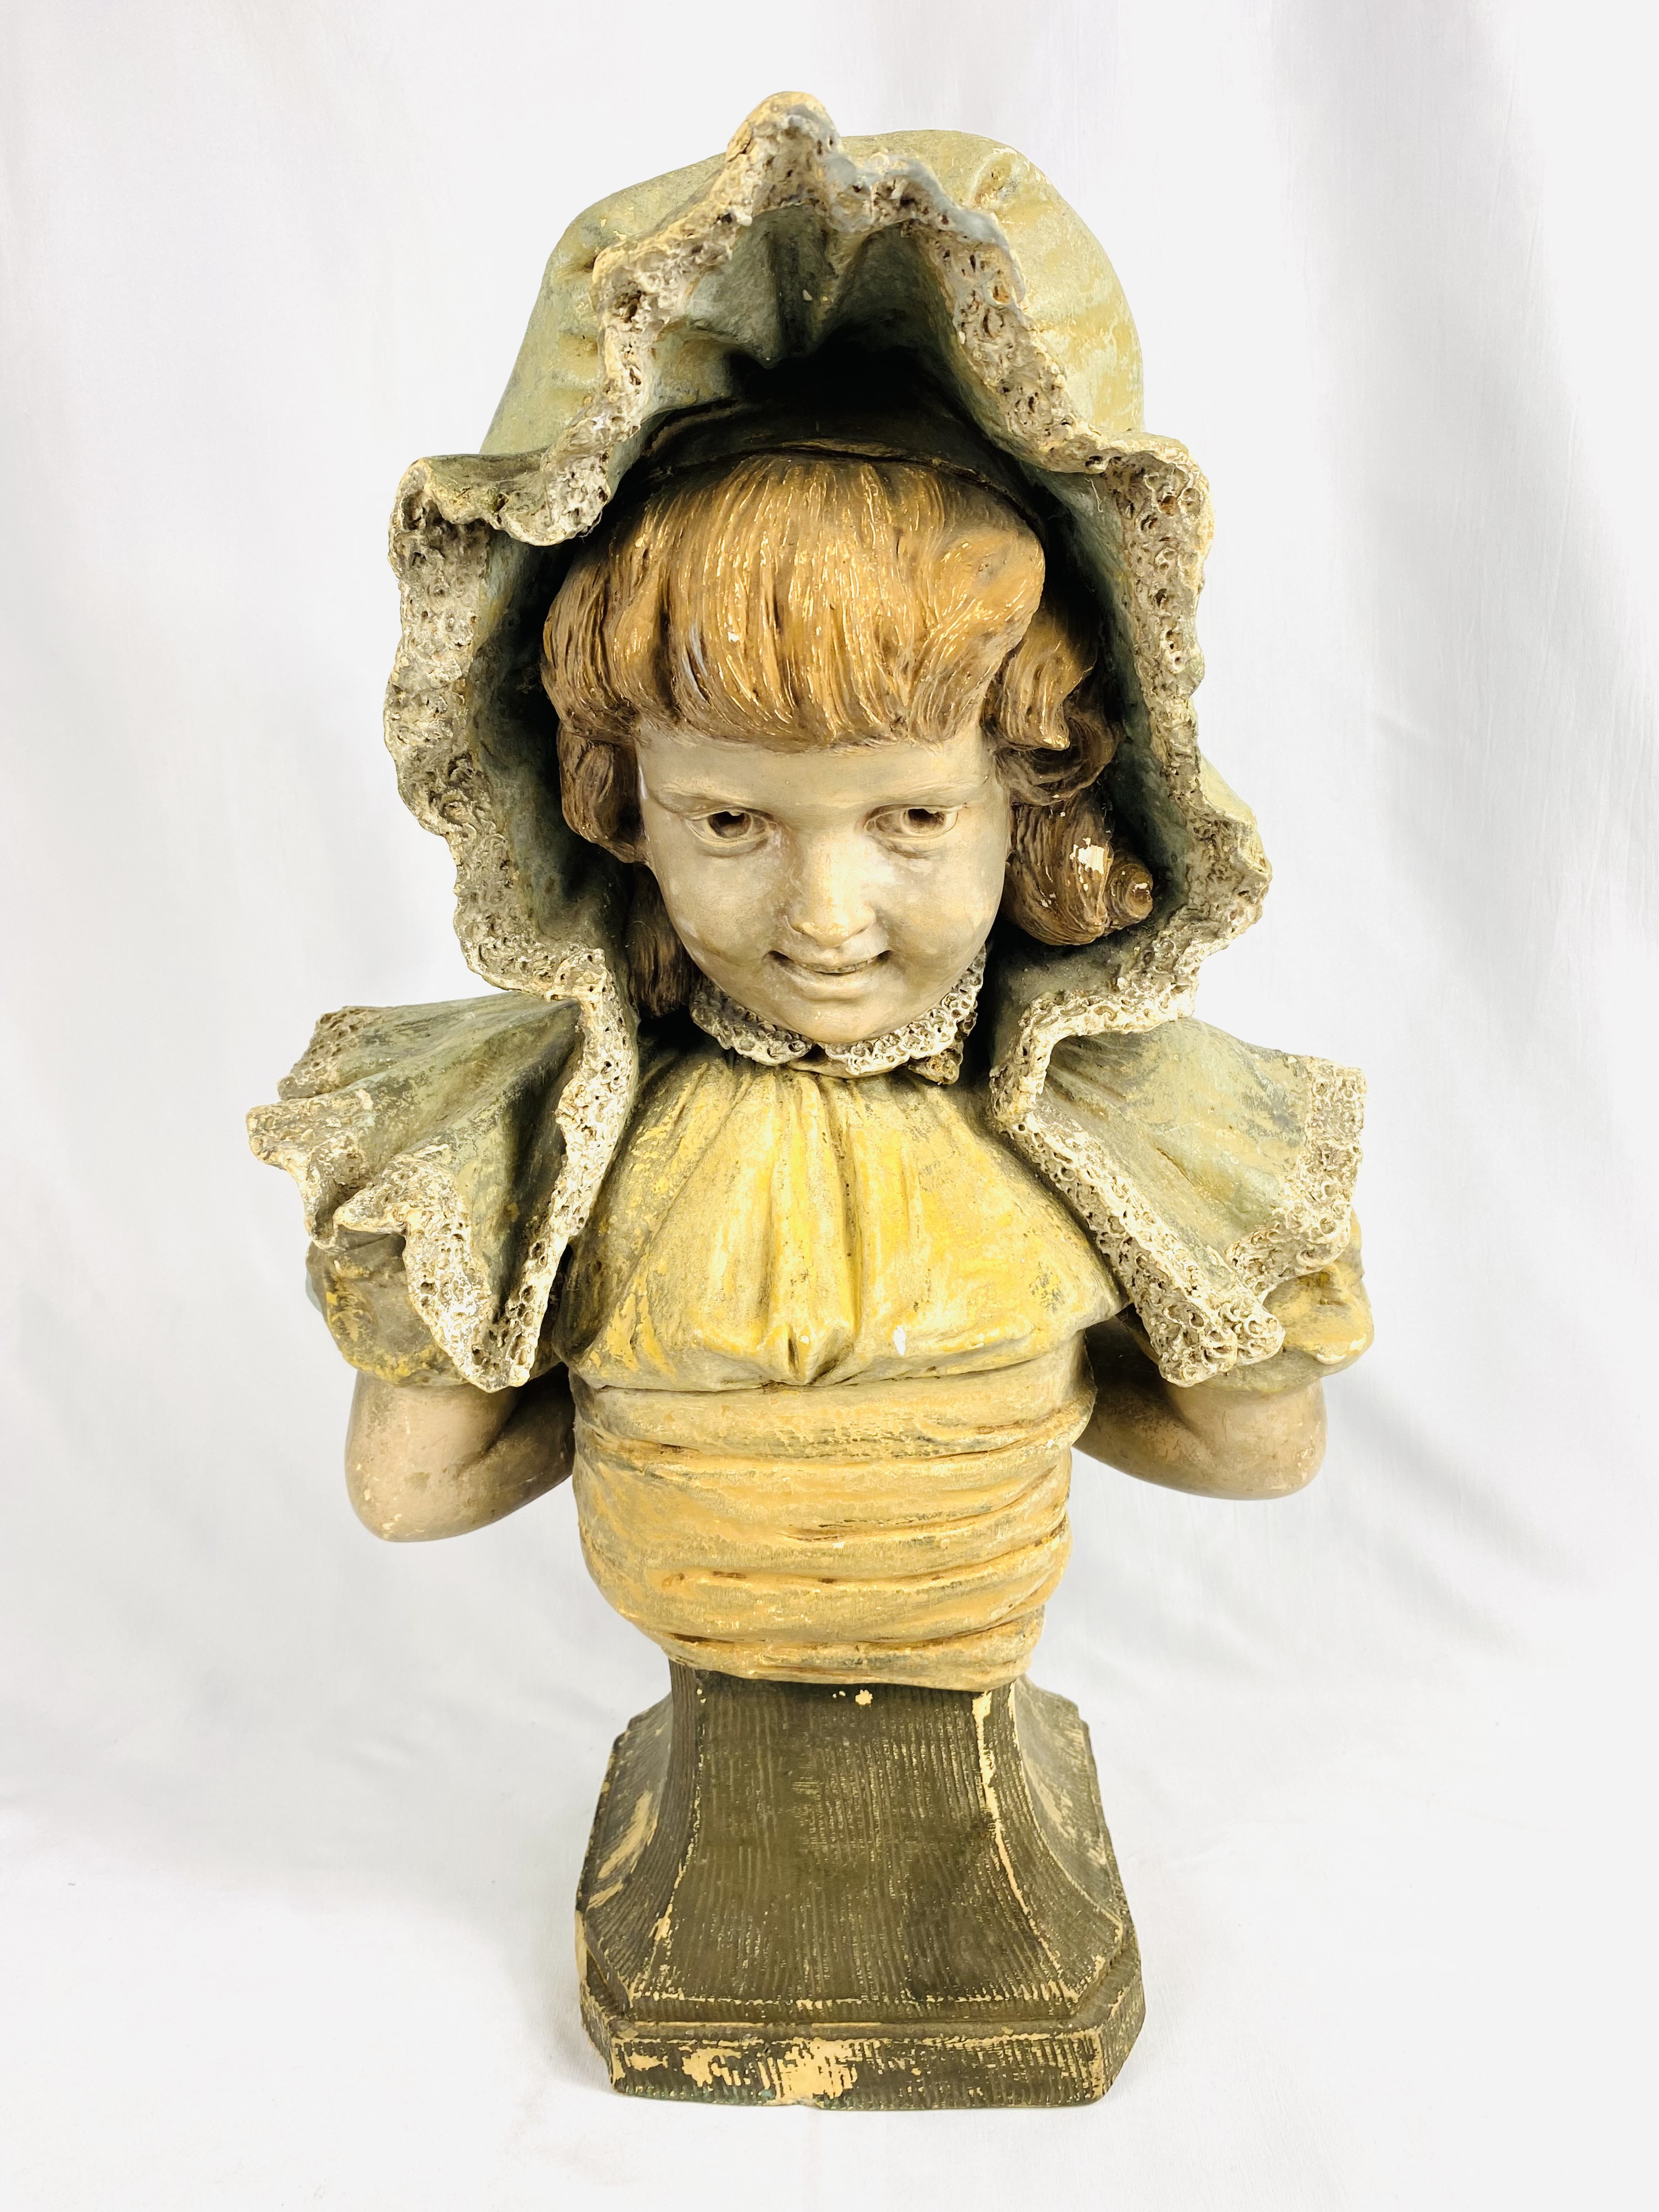 Pottery bust of an Edwardian girl. From the Estate of Dame Mary Quant